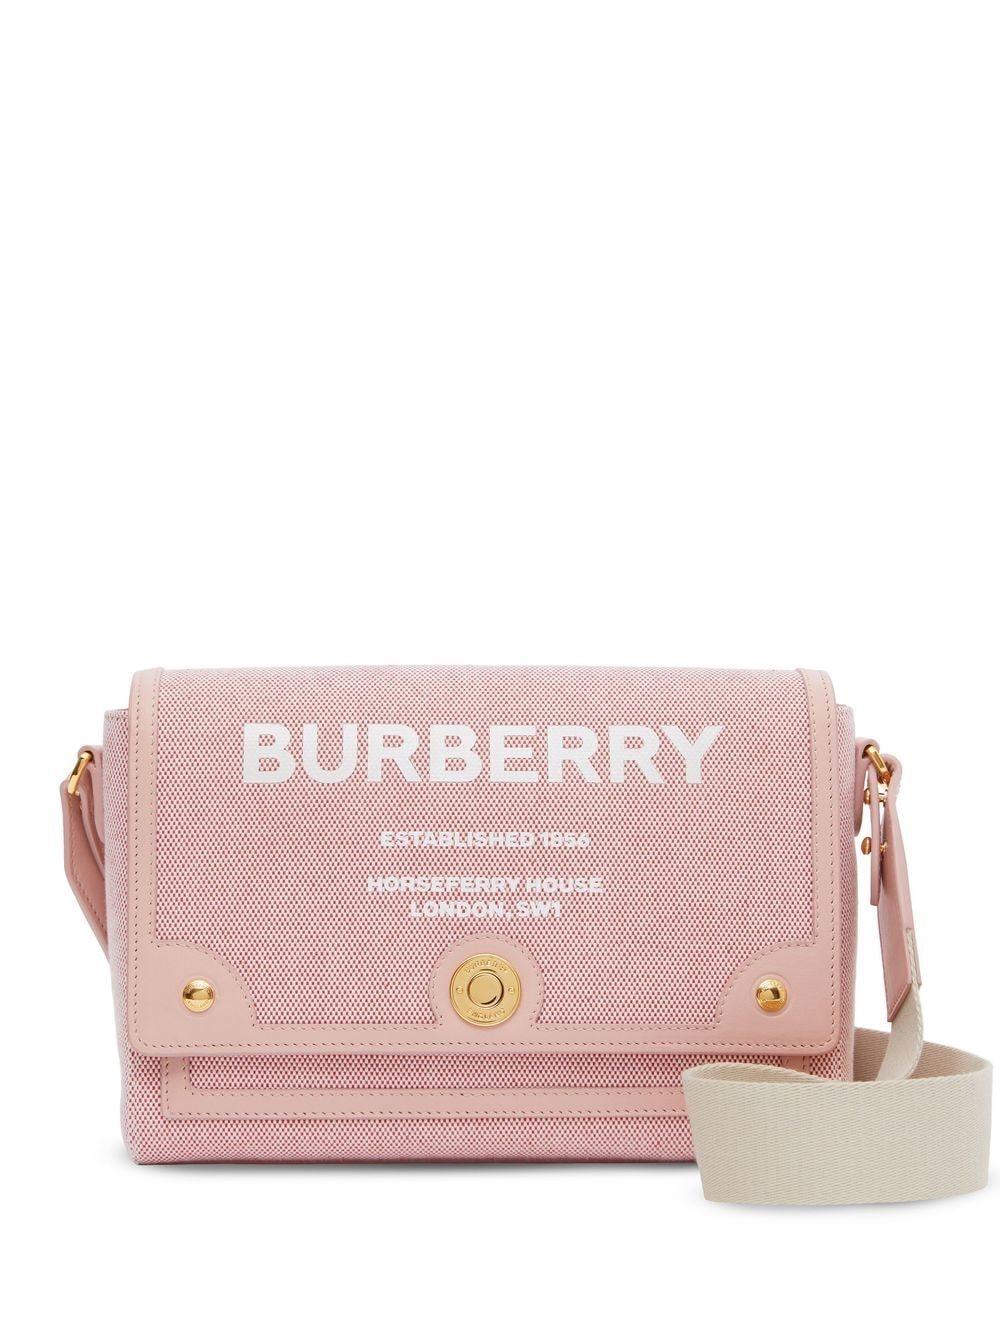 Burberry Horseferry Canvas Crossbody Bag in Pink | Lyst